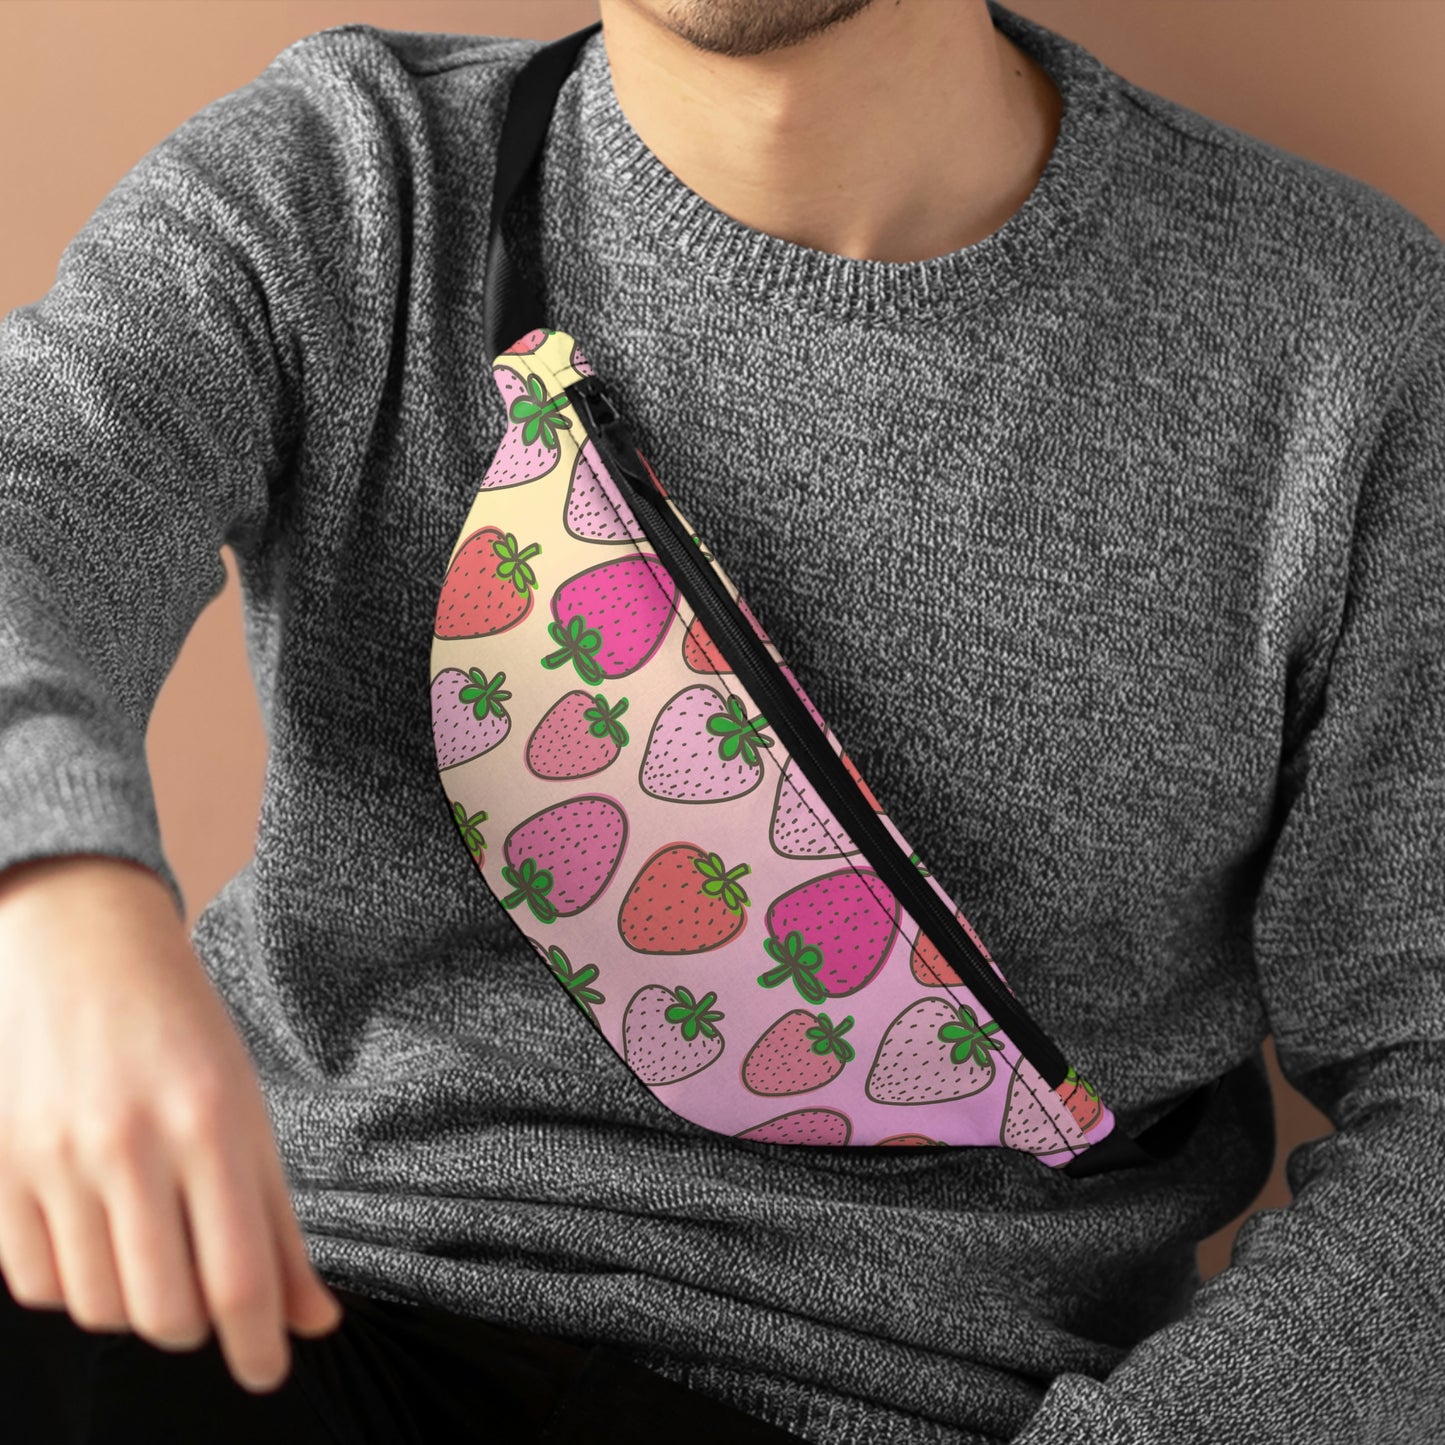 Strawberry Patch Fanny Pack